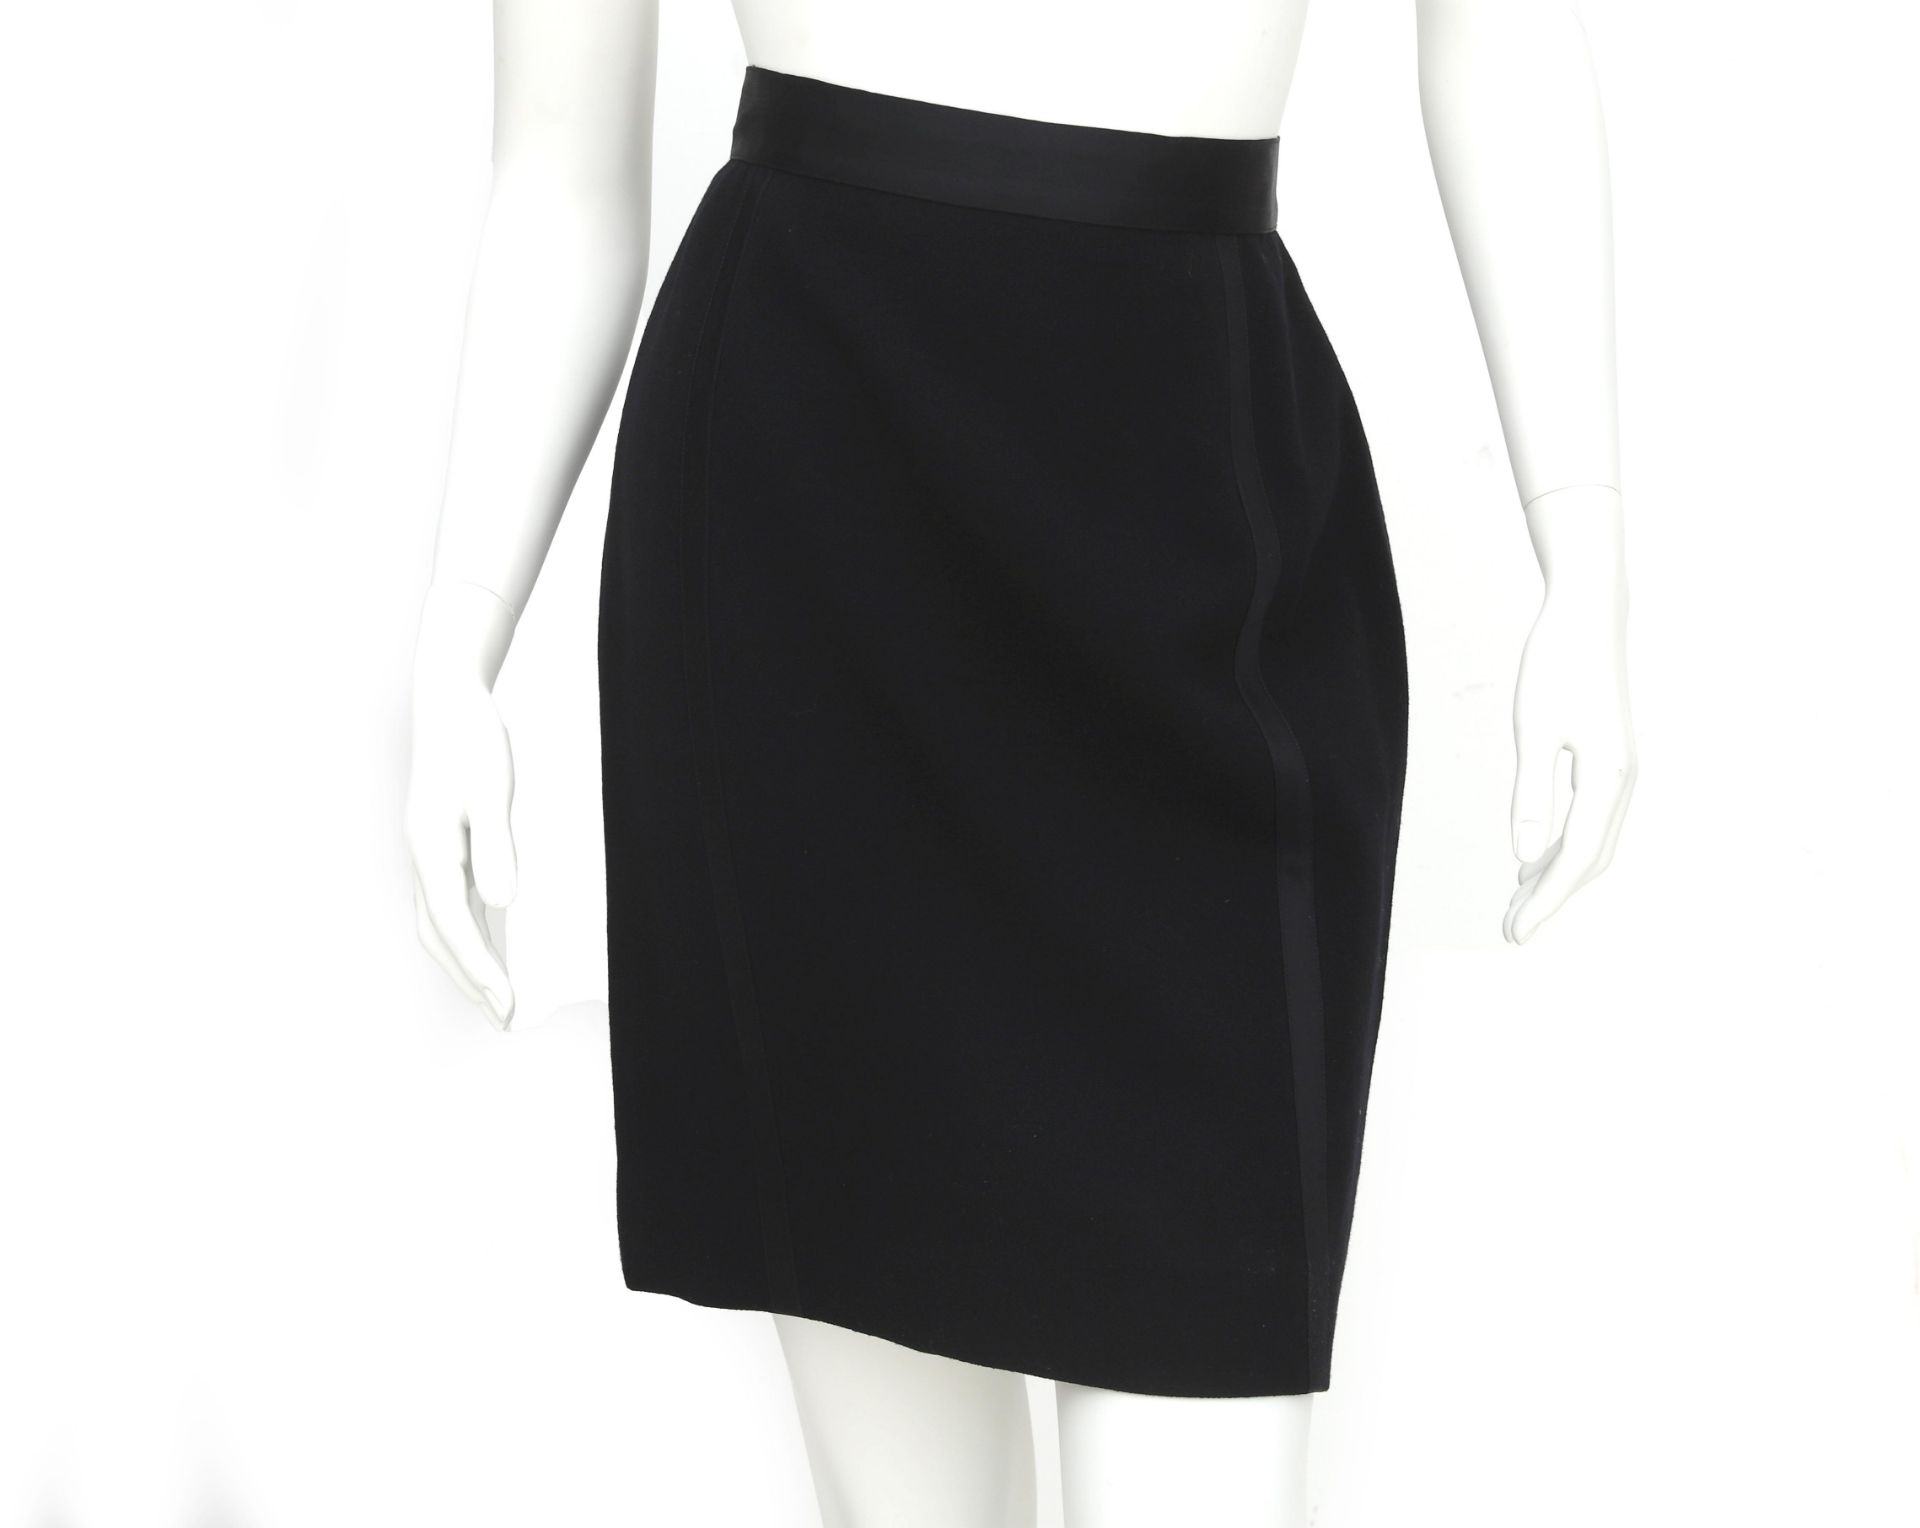 A black Chanel pencil skirt with stripe details down the length of the skirt. With two golden waffle